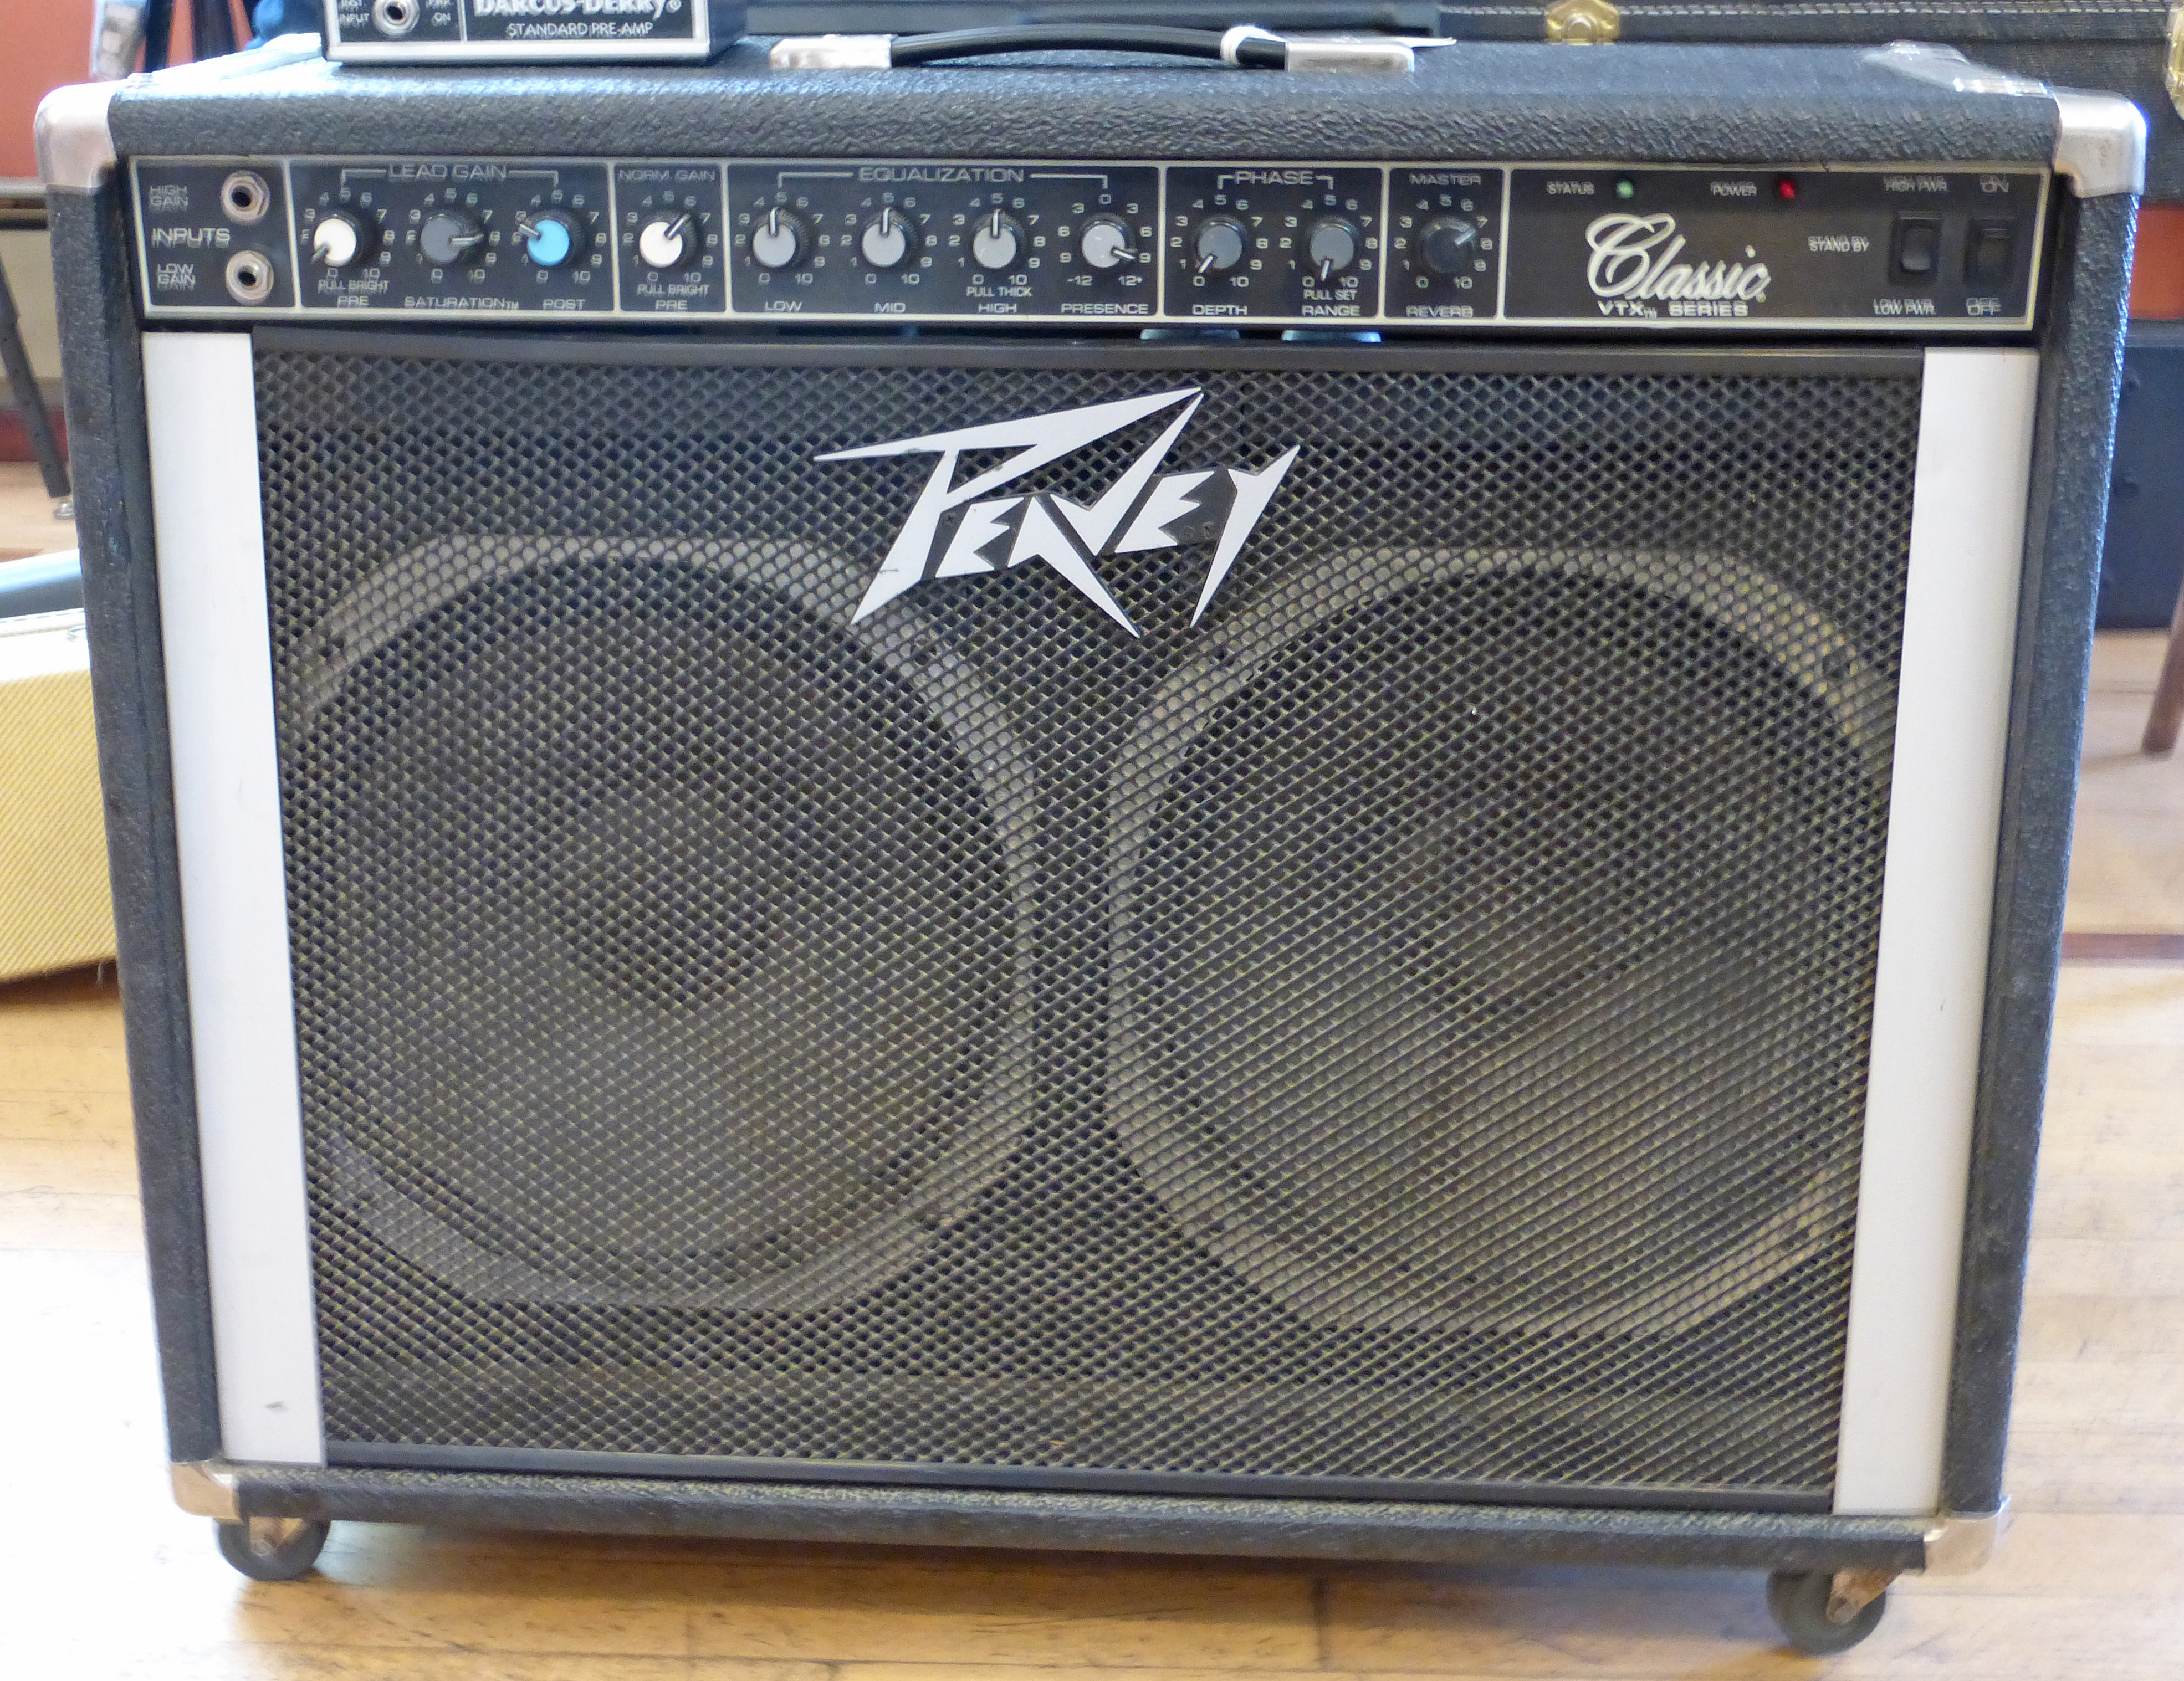 1983 Peavey VTX 212 Classic Amp w/ Footswitch Product